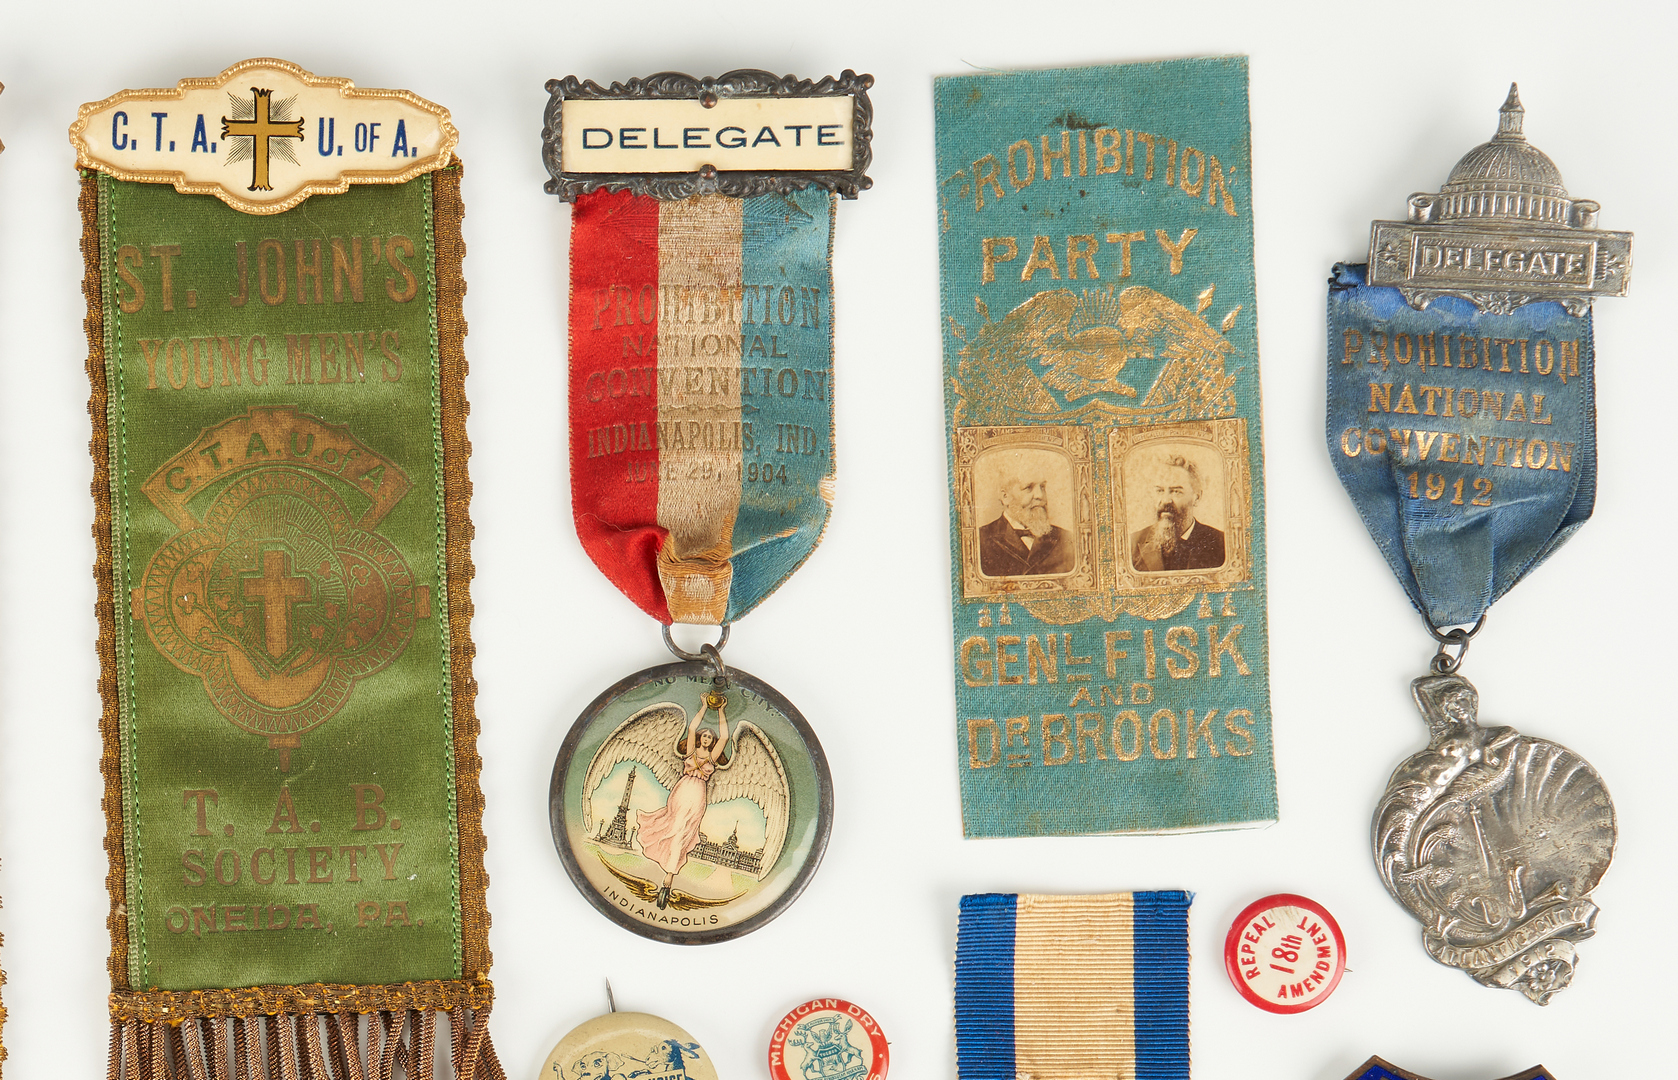 Lot 687: Group of Prohibition/Temperance Related Ephemera, incl. Campaign Buttons